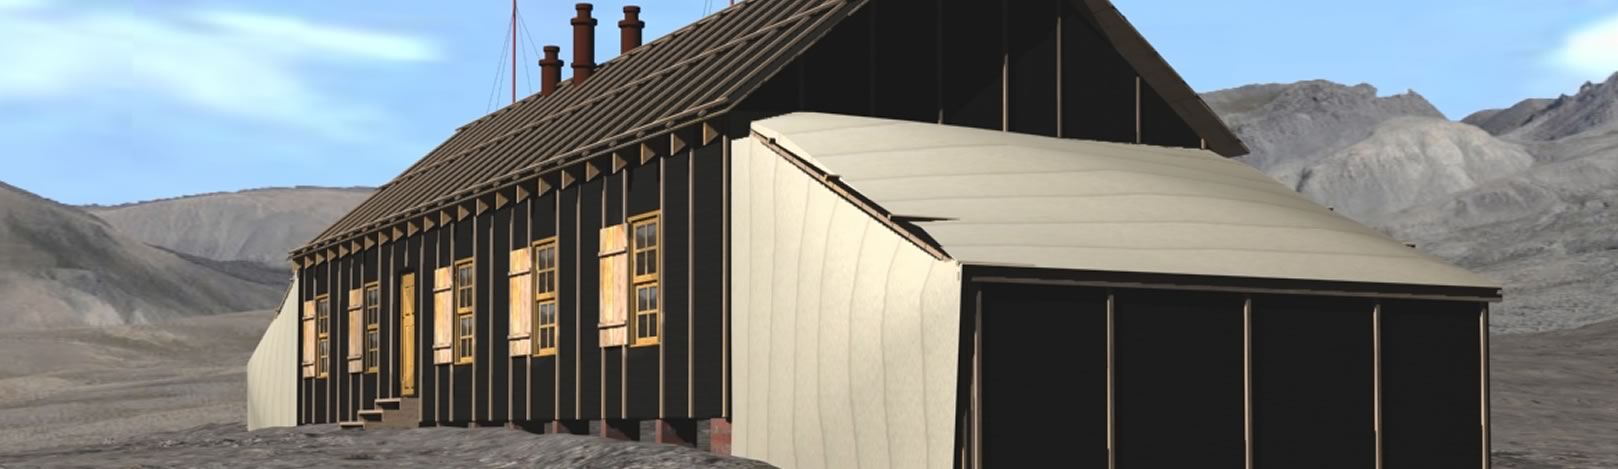 Virtual reconstruction of the same historic photo, showing the completed model of the expedition house with canvas lean-to.